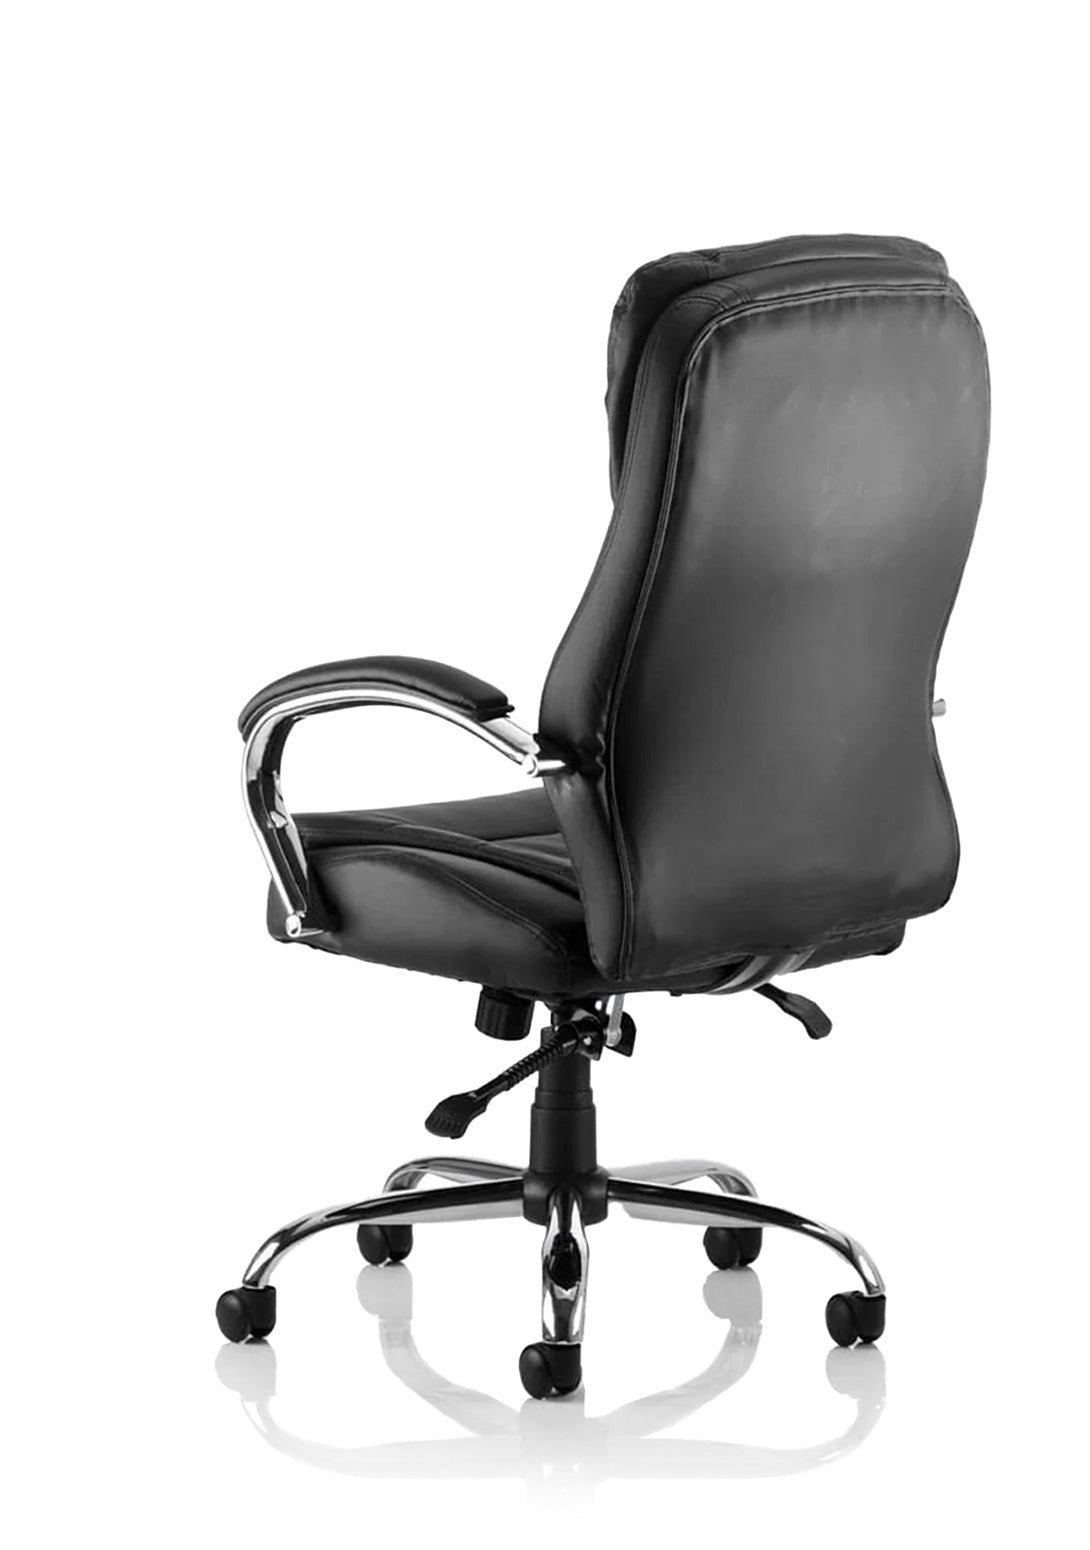 Rocky High Back Executive Black Leather Office Chair with Arms